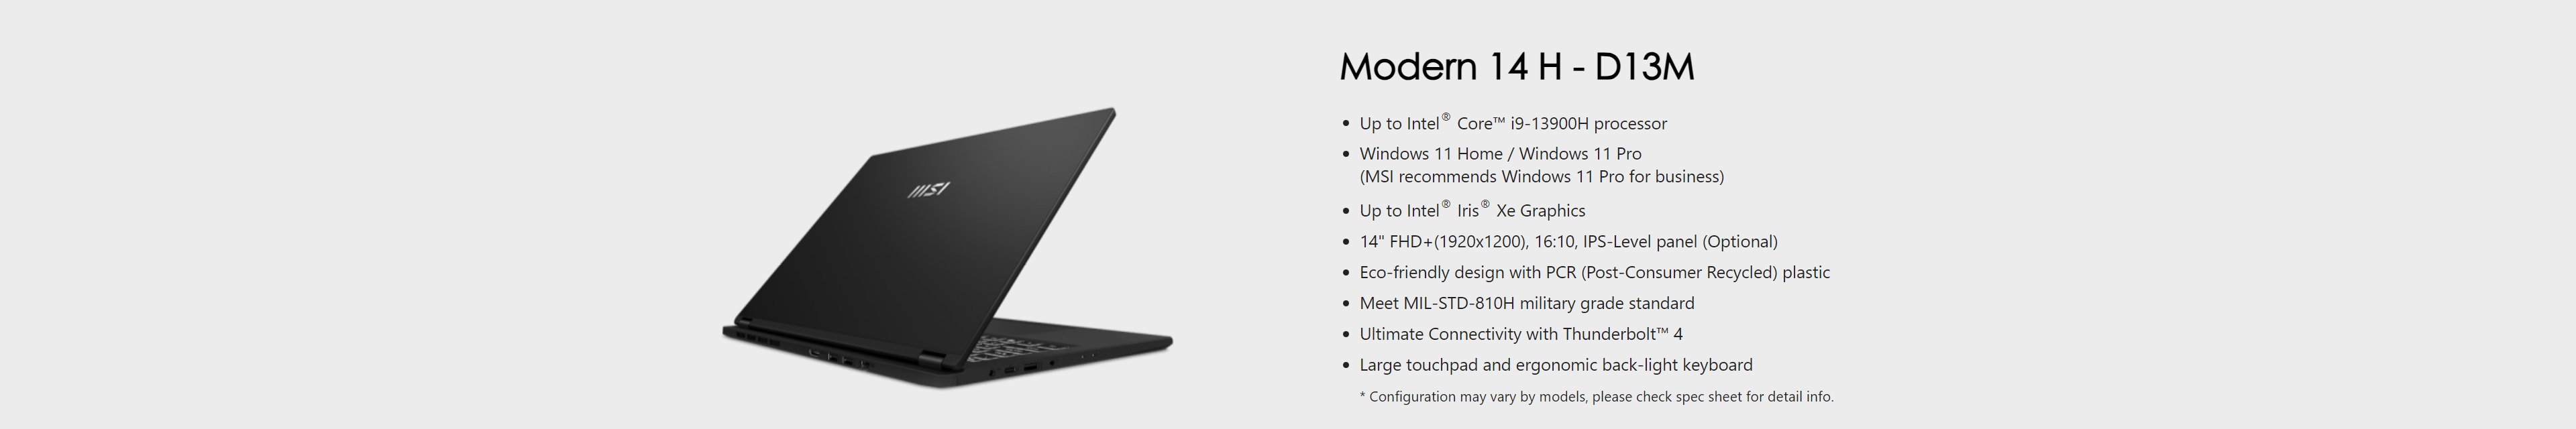 A large marketing image providing additional information about the product MSI Modern 14 H D13MG-045AU 14" 13th Gen i9 13900H Win 11 Notebook - Additional alt info not provided